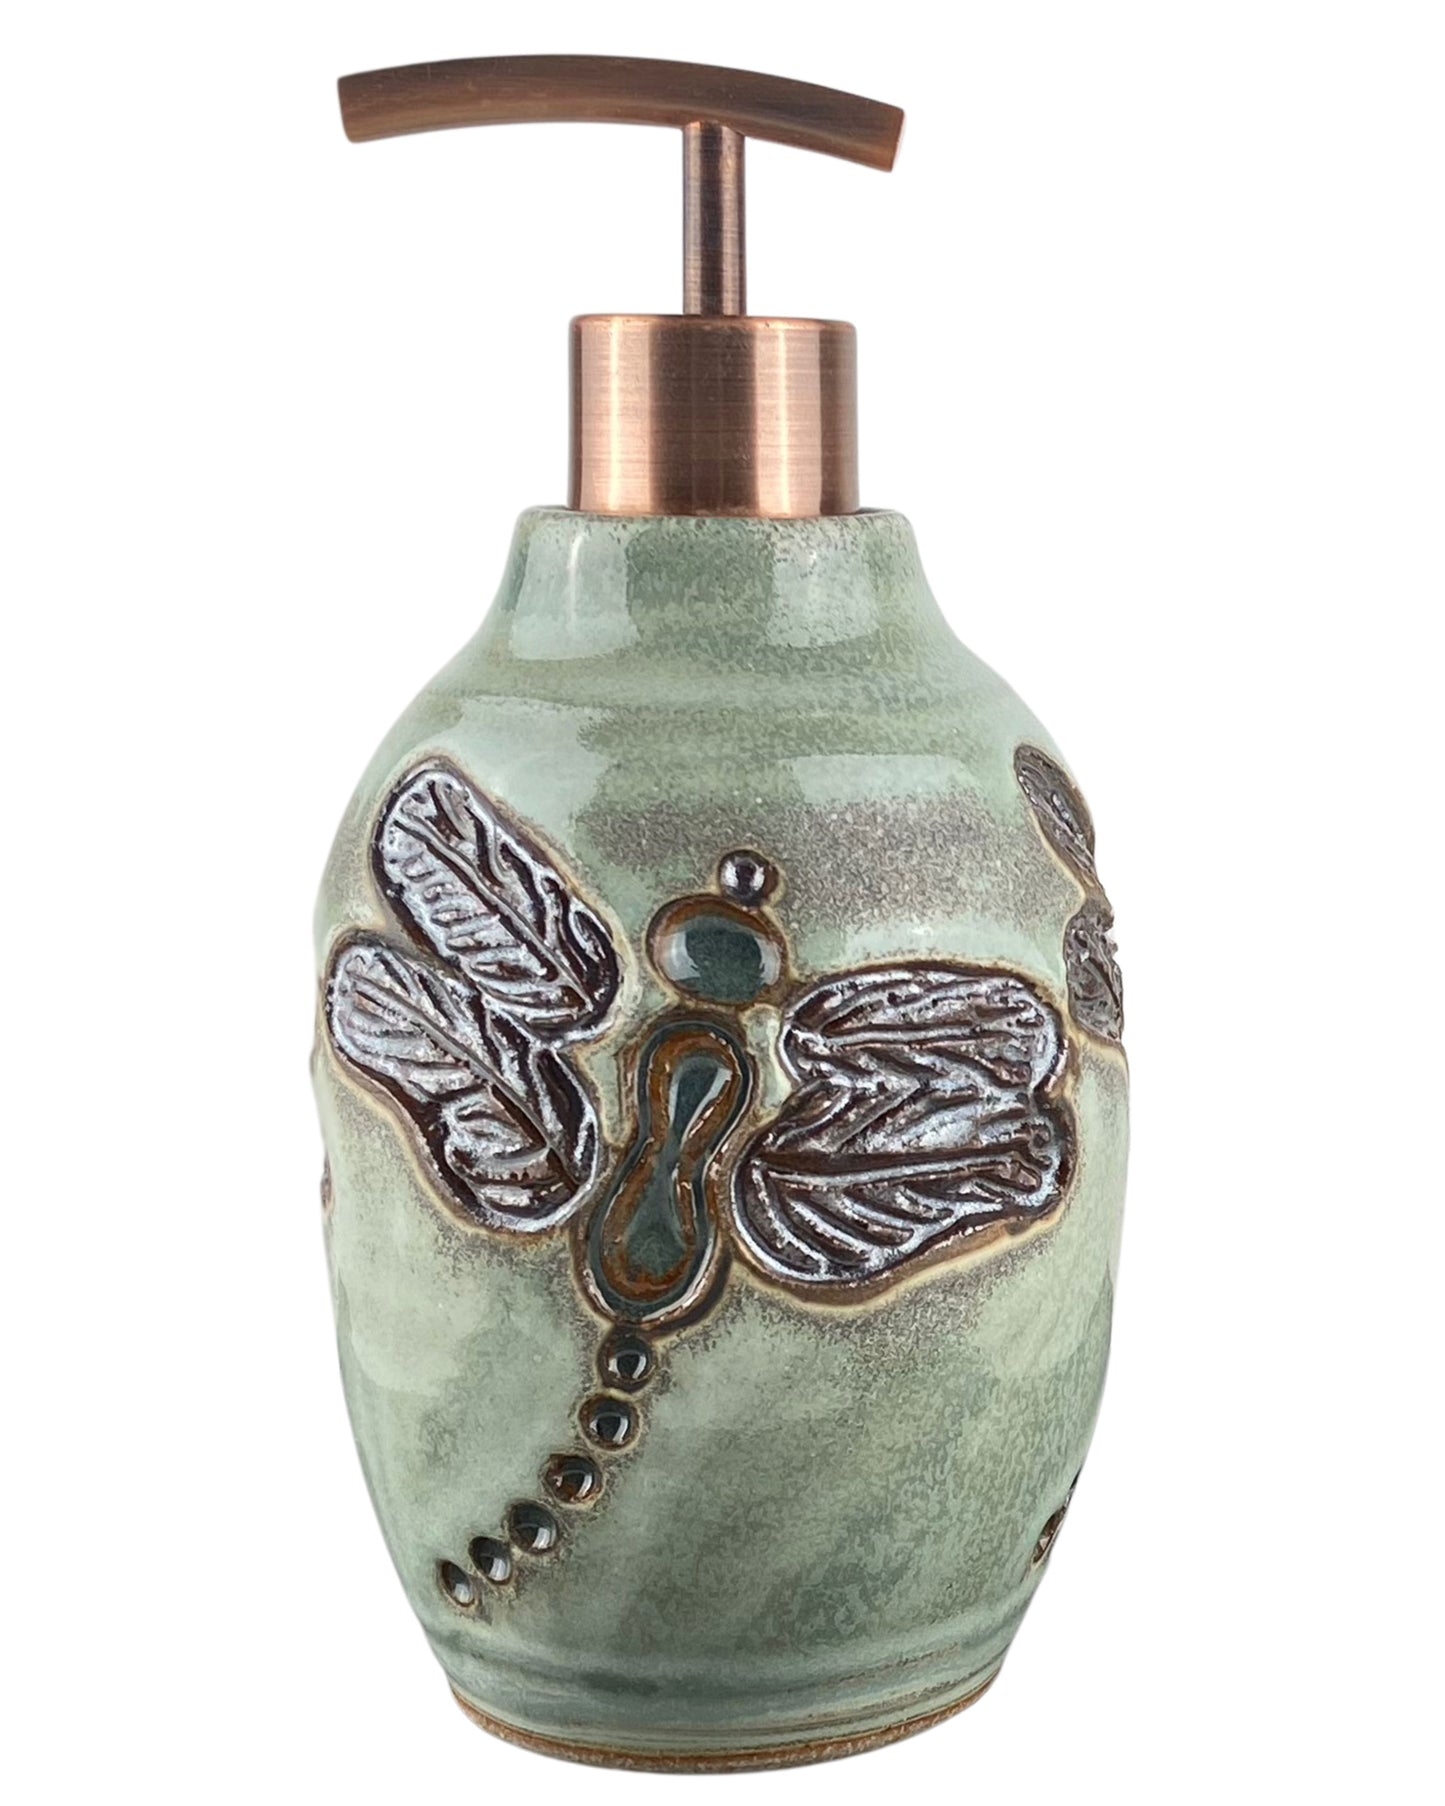 15 oz. Liquid Soap or Lotion Dispenser with Dragonfly Design